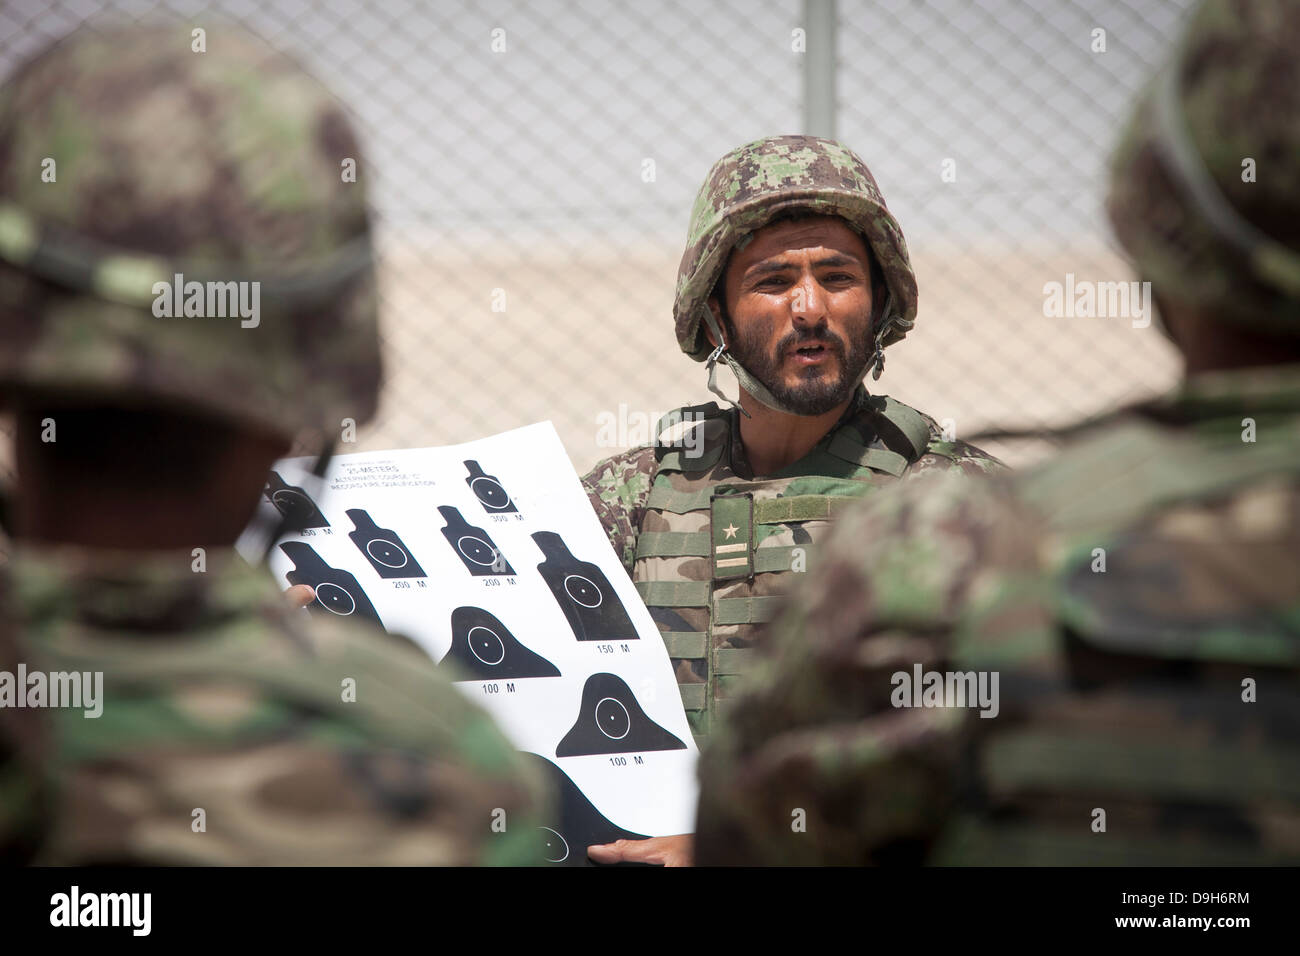 An Afghan National Army soldier with the Kandak Special Operations forces briefs fellow soldiers before a live-fire exercise May 20, 2013 in Camp Shorabak, Afghanistan. Stock Photo